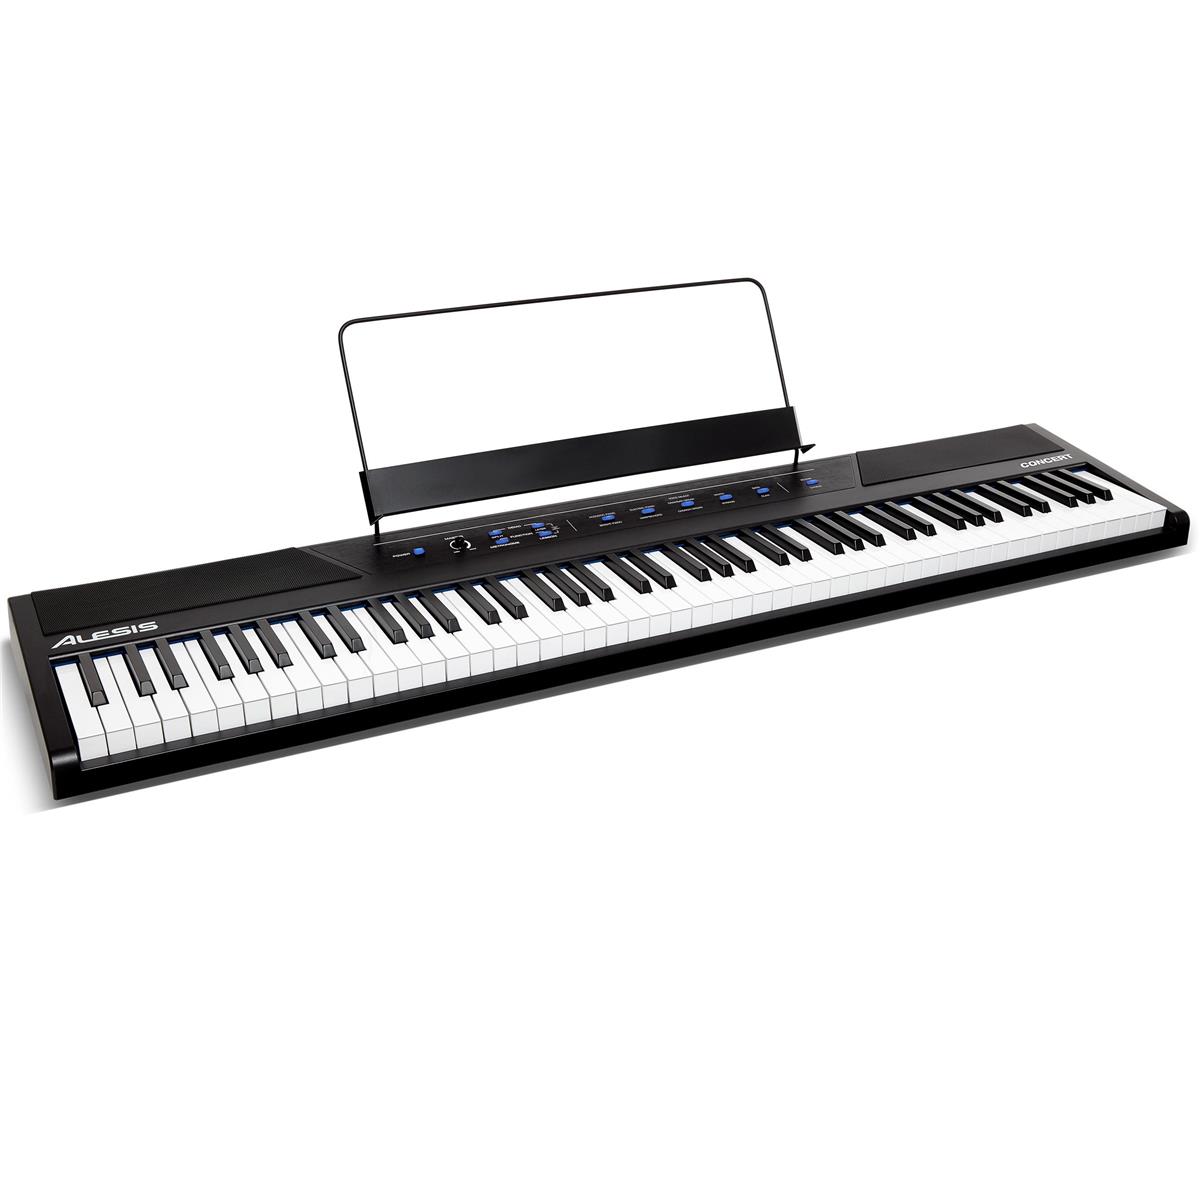 Image of Alesis Concert 88 Key Semi-weighted Digital Piano